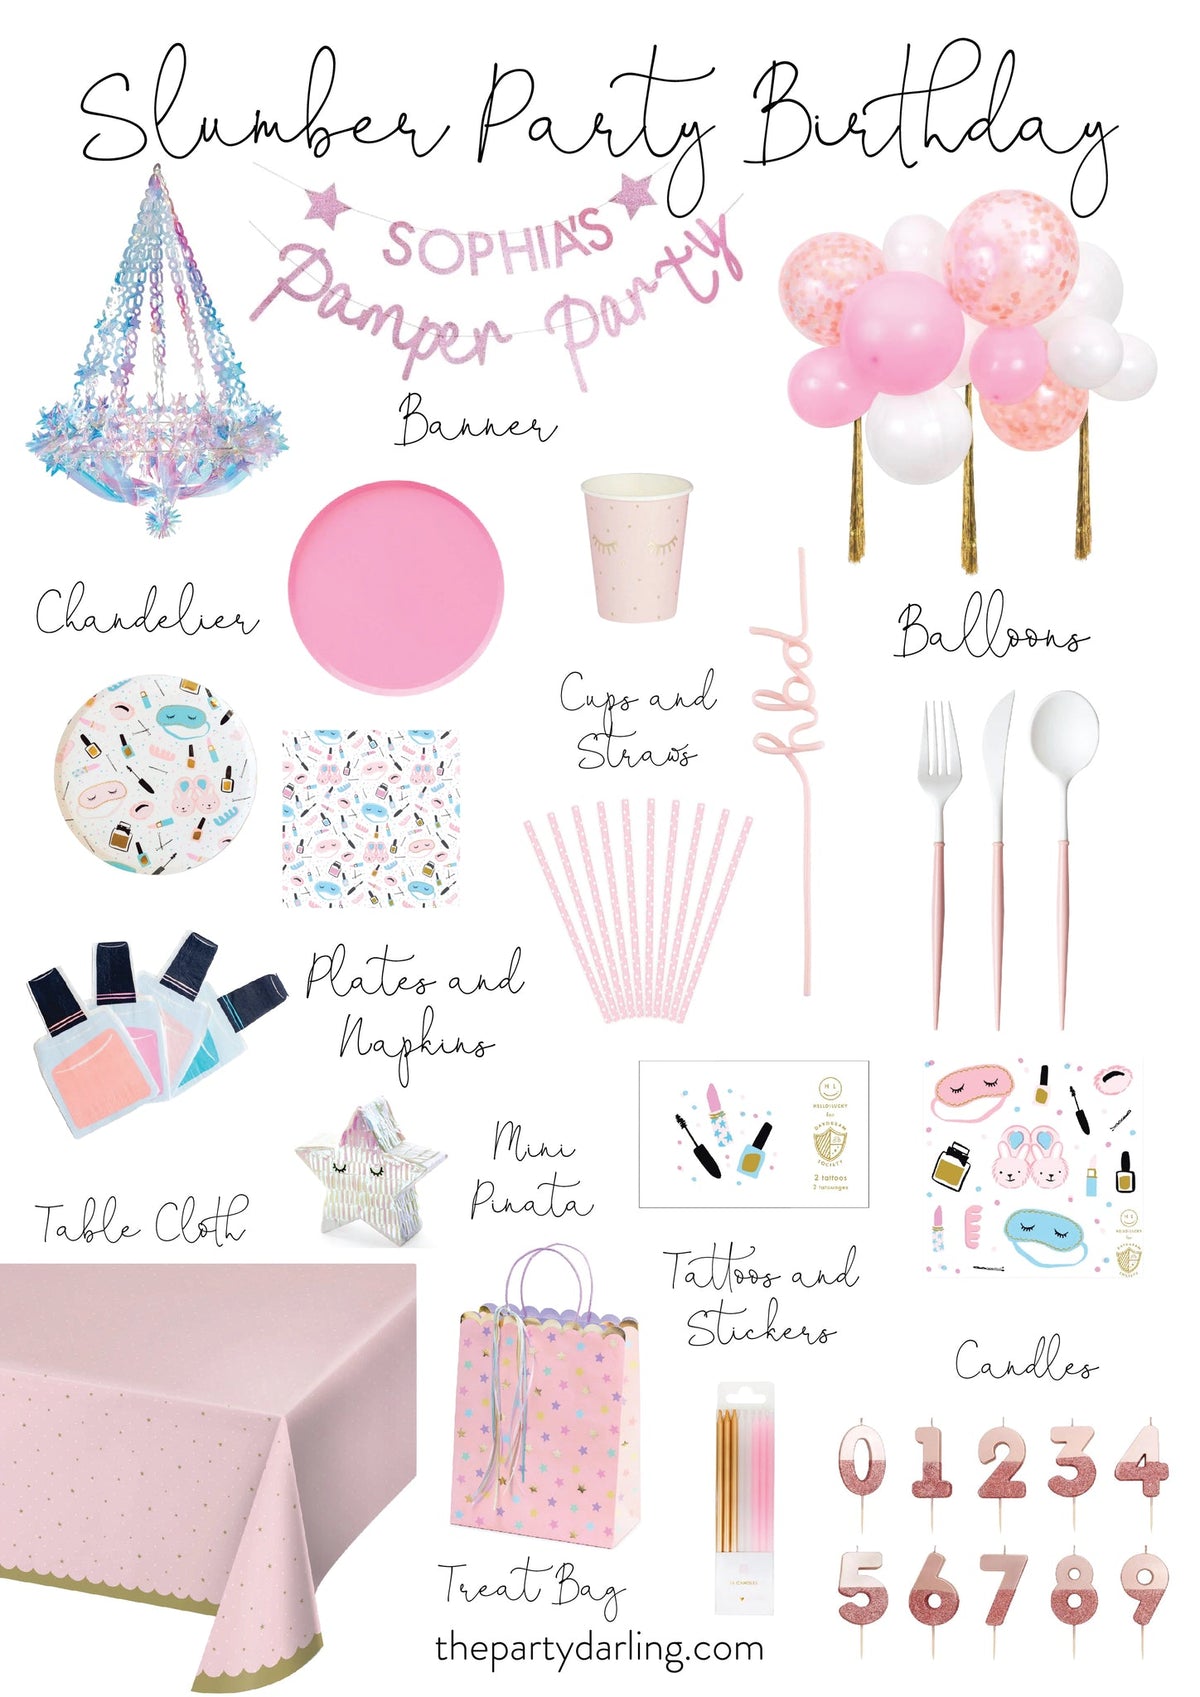 Slumber Party Planning Ideas and Supplies